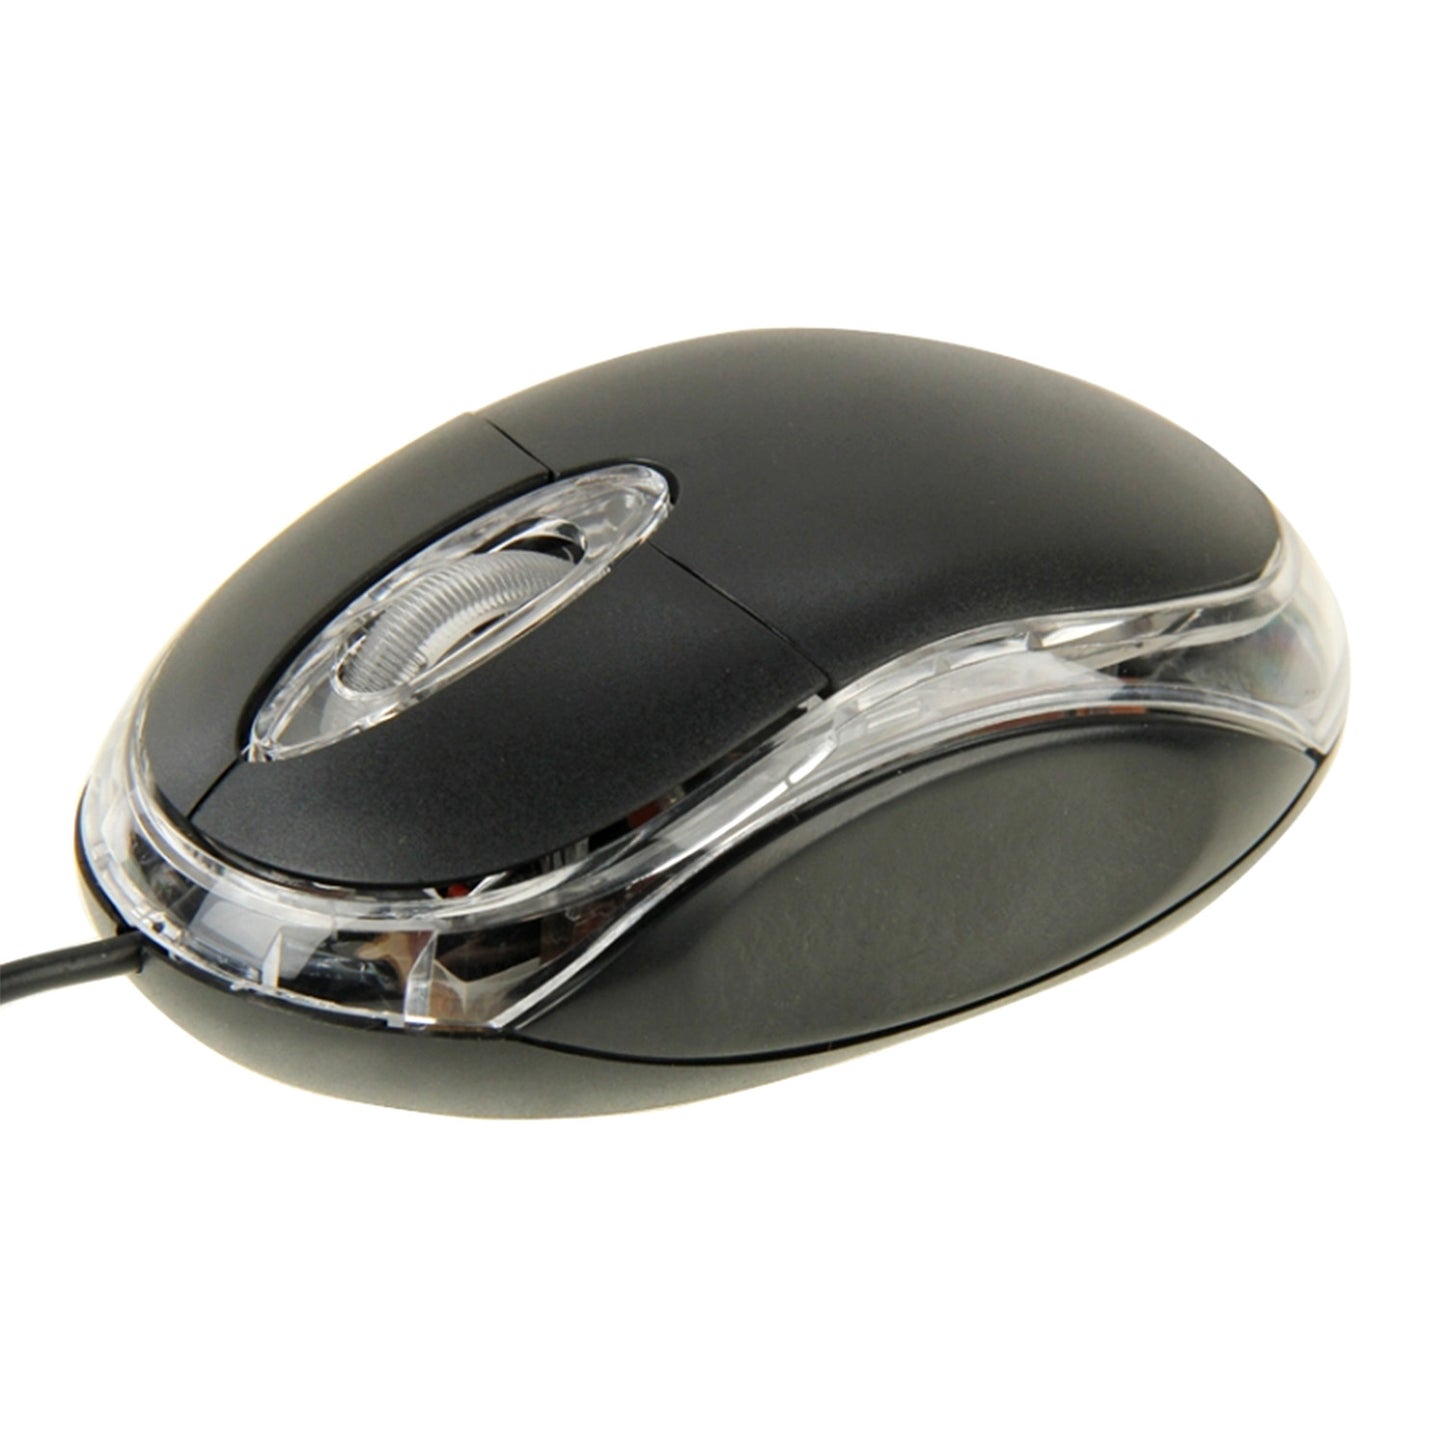 RGB Backlit USB Wired Optical Mouse